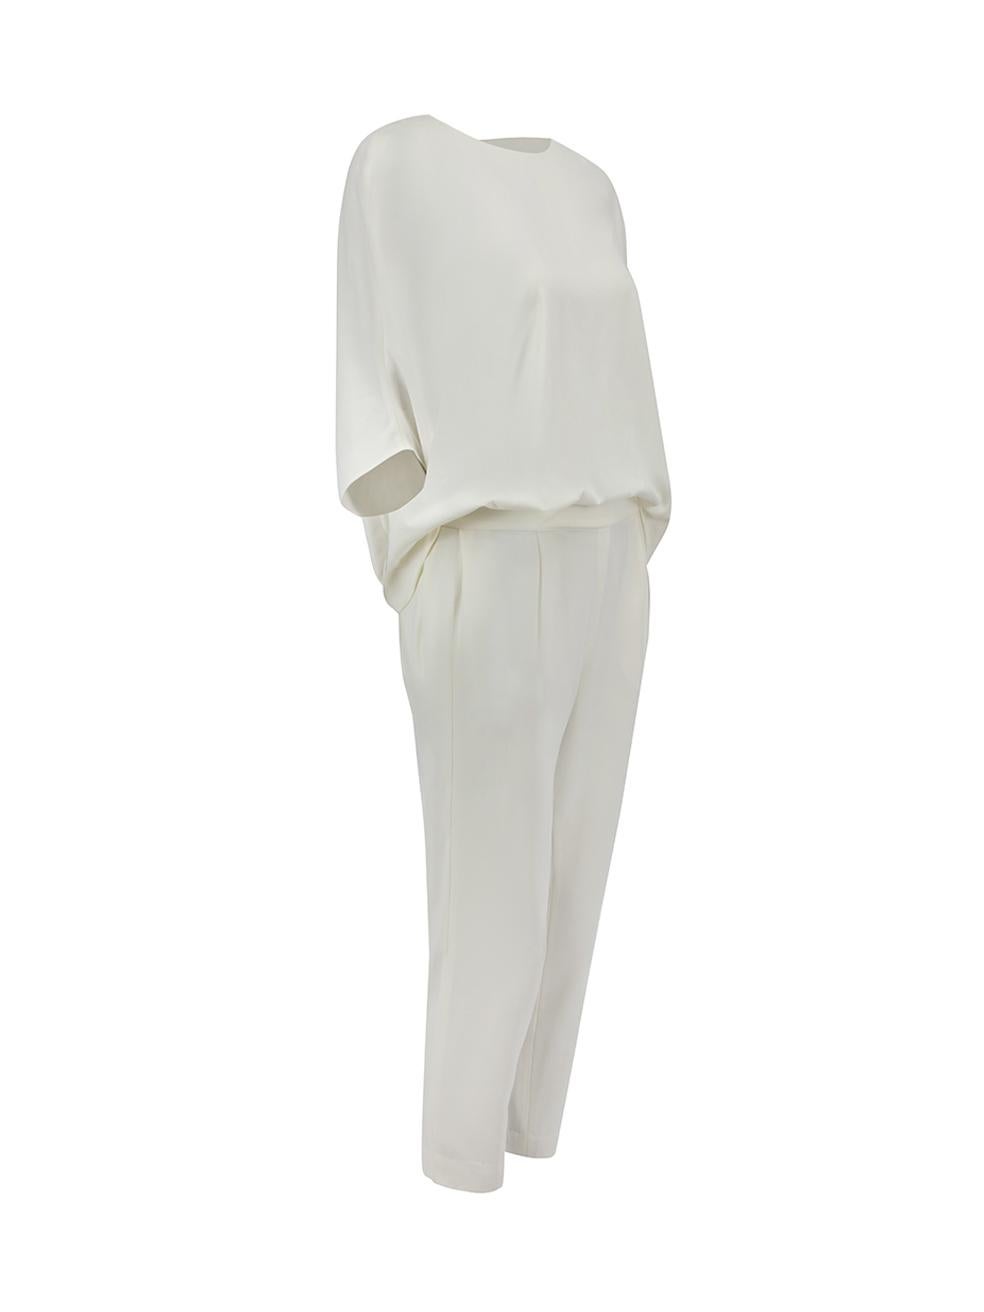 CONDITION is Never worn, with tags. No visible wear to jumpsuit is evident on this new Halston Heritage designer resale item.



Details


Chalk white

Polyester

Jumpsuit

Bat wing top

Short sleeves

Round neck

Back button fastening

Back keyhole